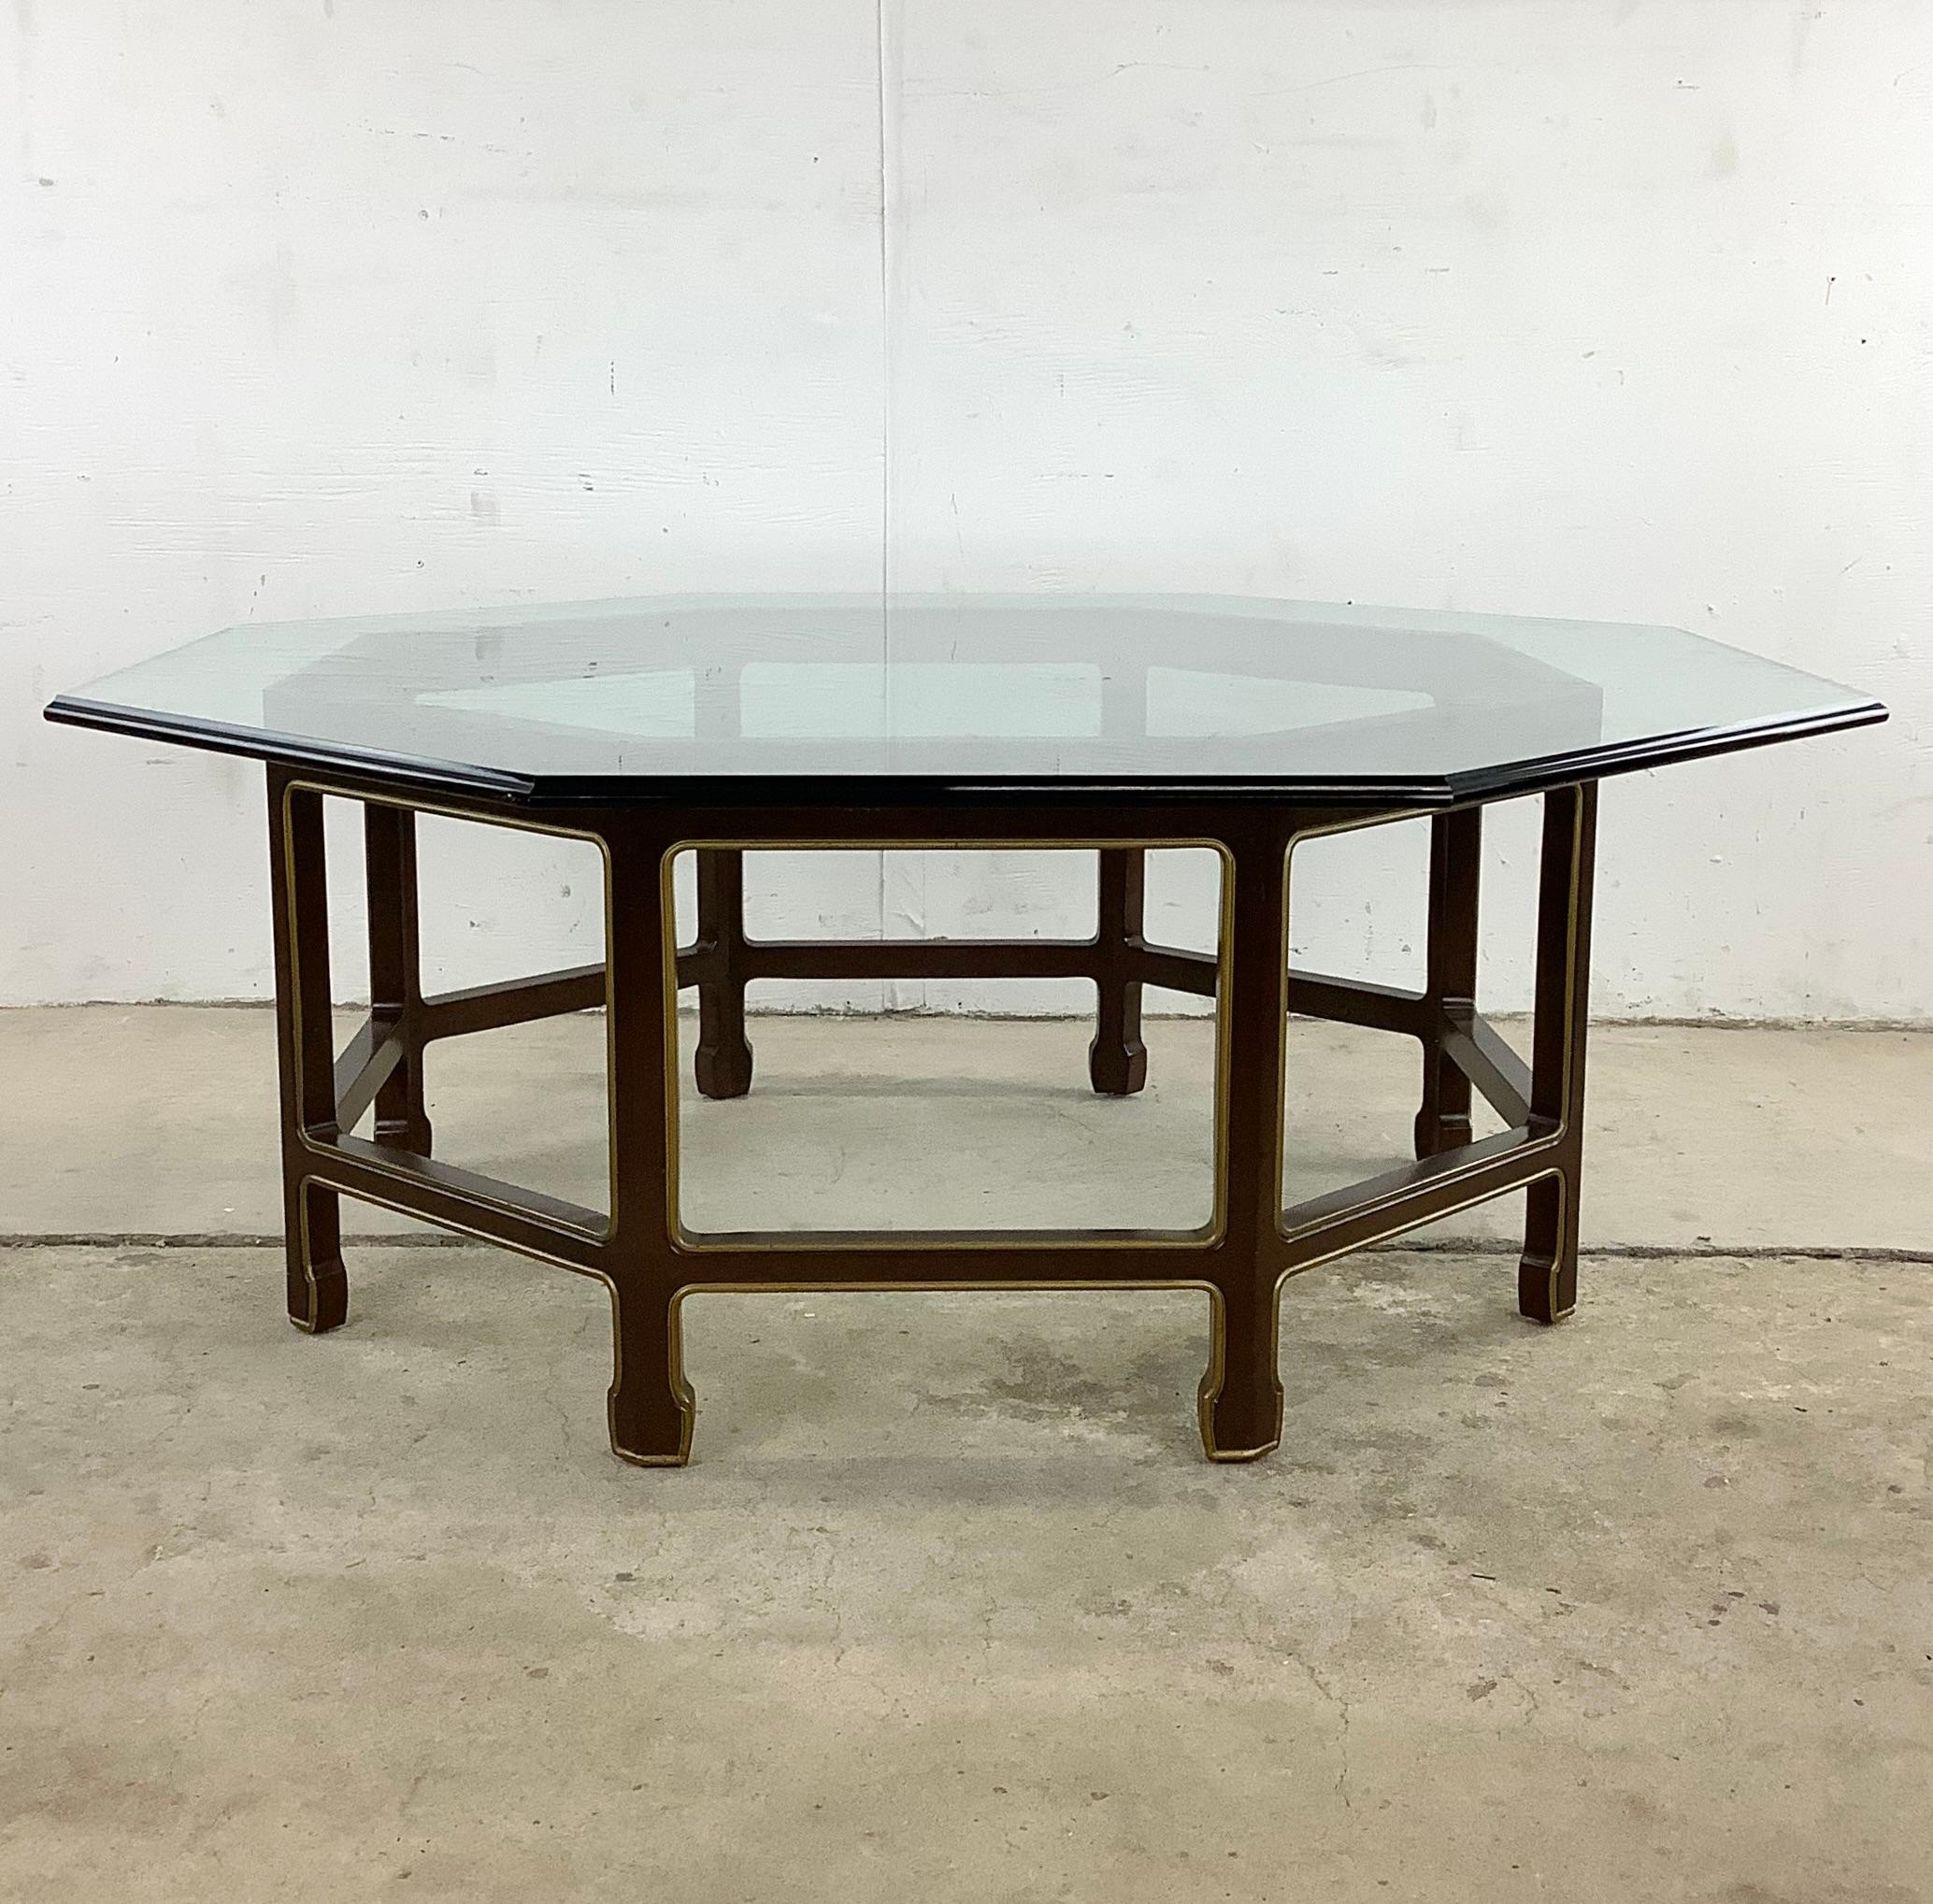 Vintage Octagonal Coffee Table after Kindel Furniture In Good Condition For Sale In Trenton, NJ